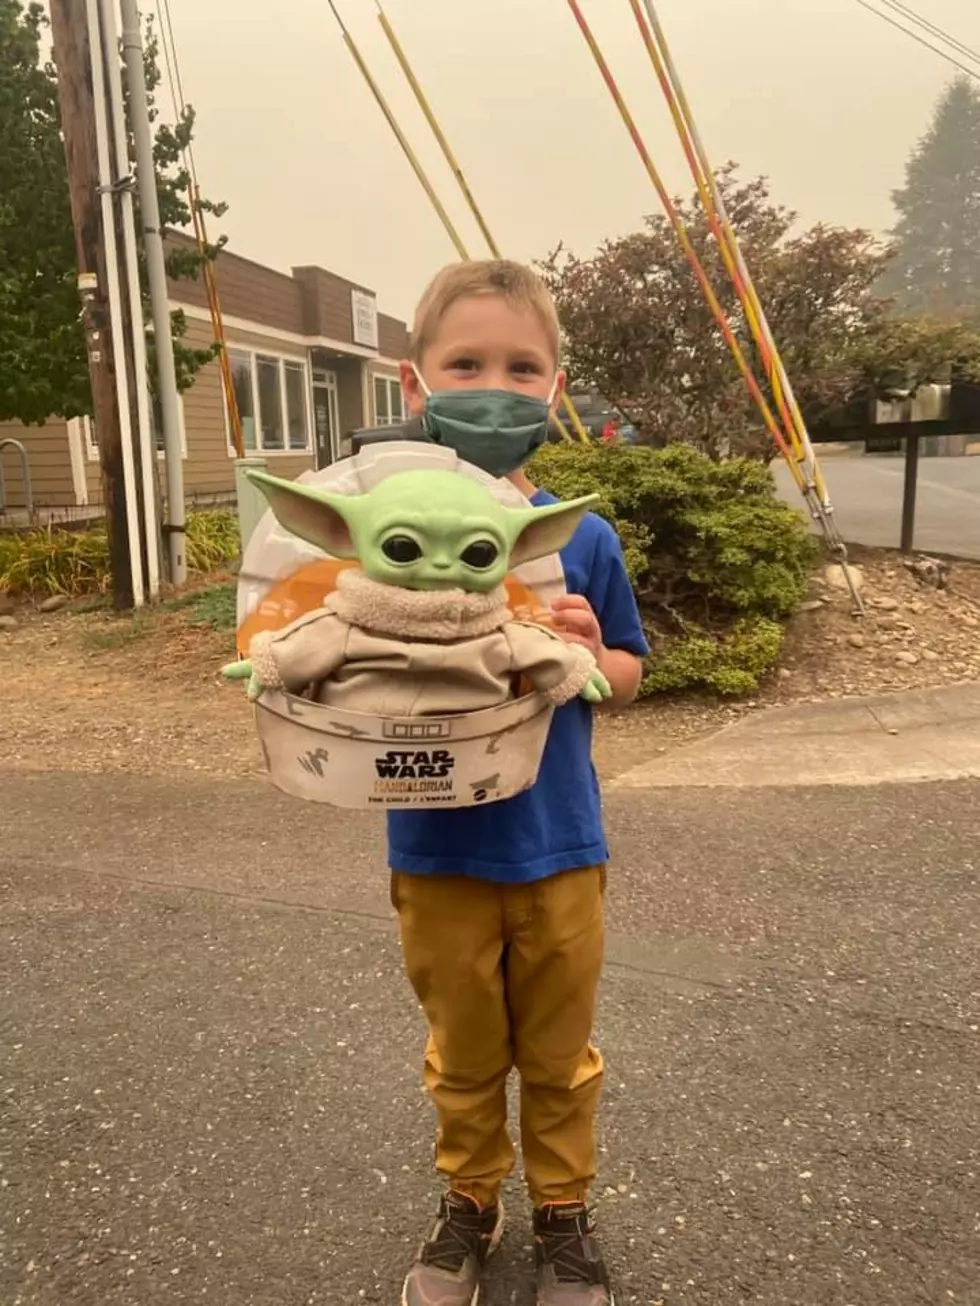 This Little Boy Gave His Baby Yoda to West Coast Firefighters